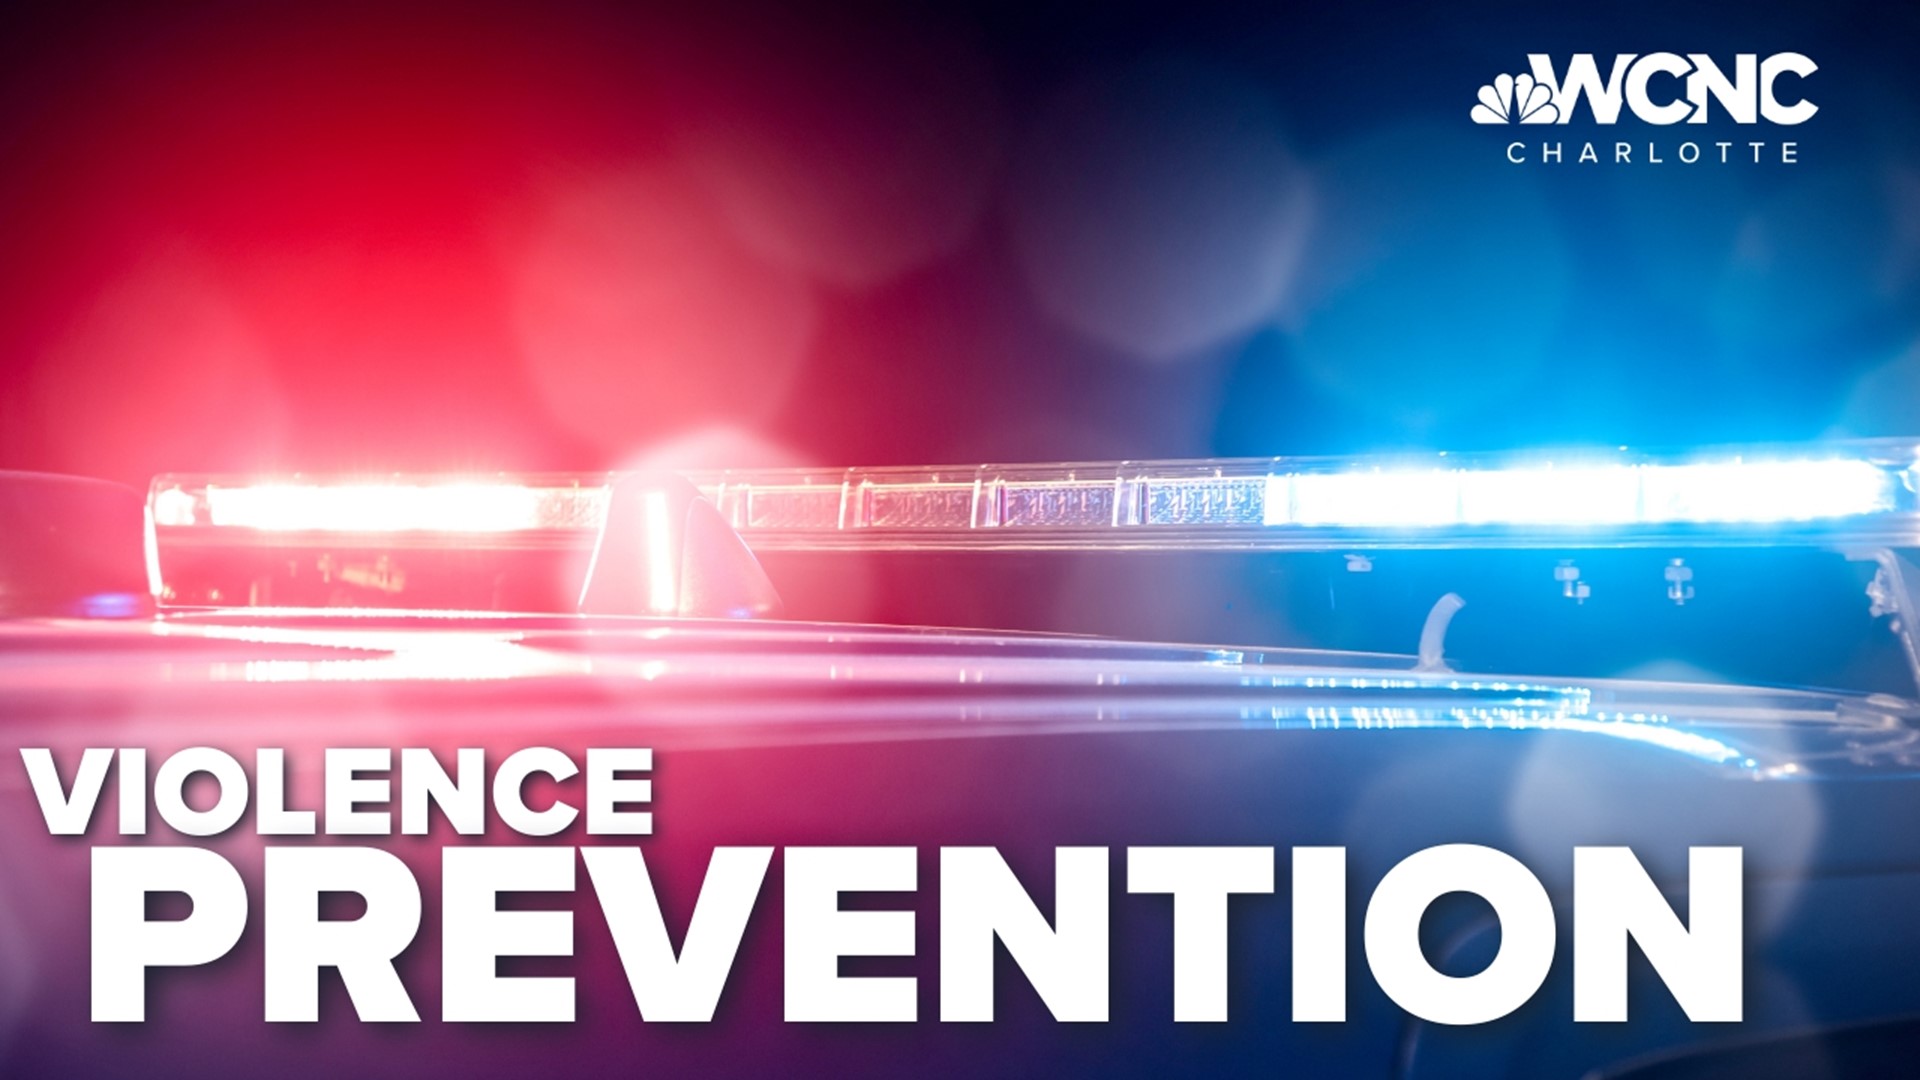 A comprehensive plan to reduce and prevent crime is on the table.